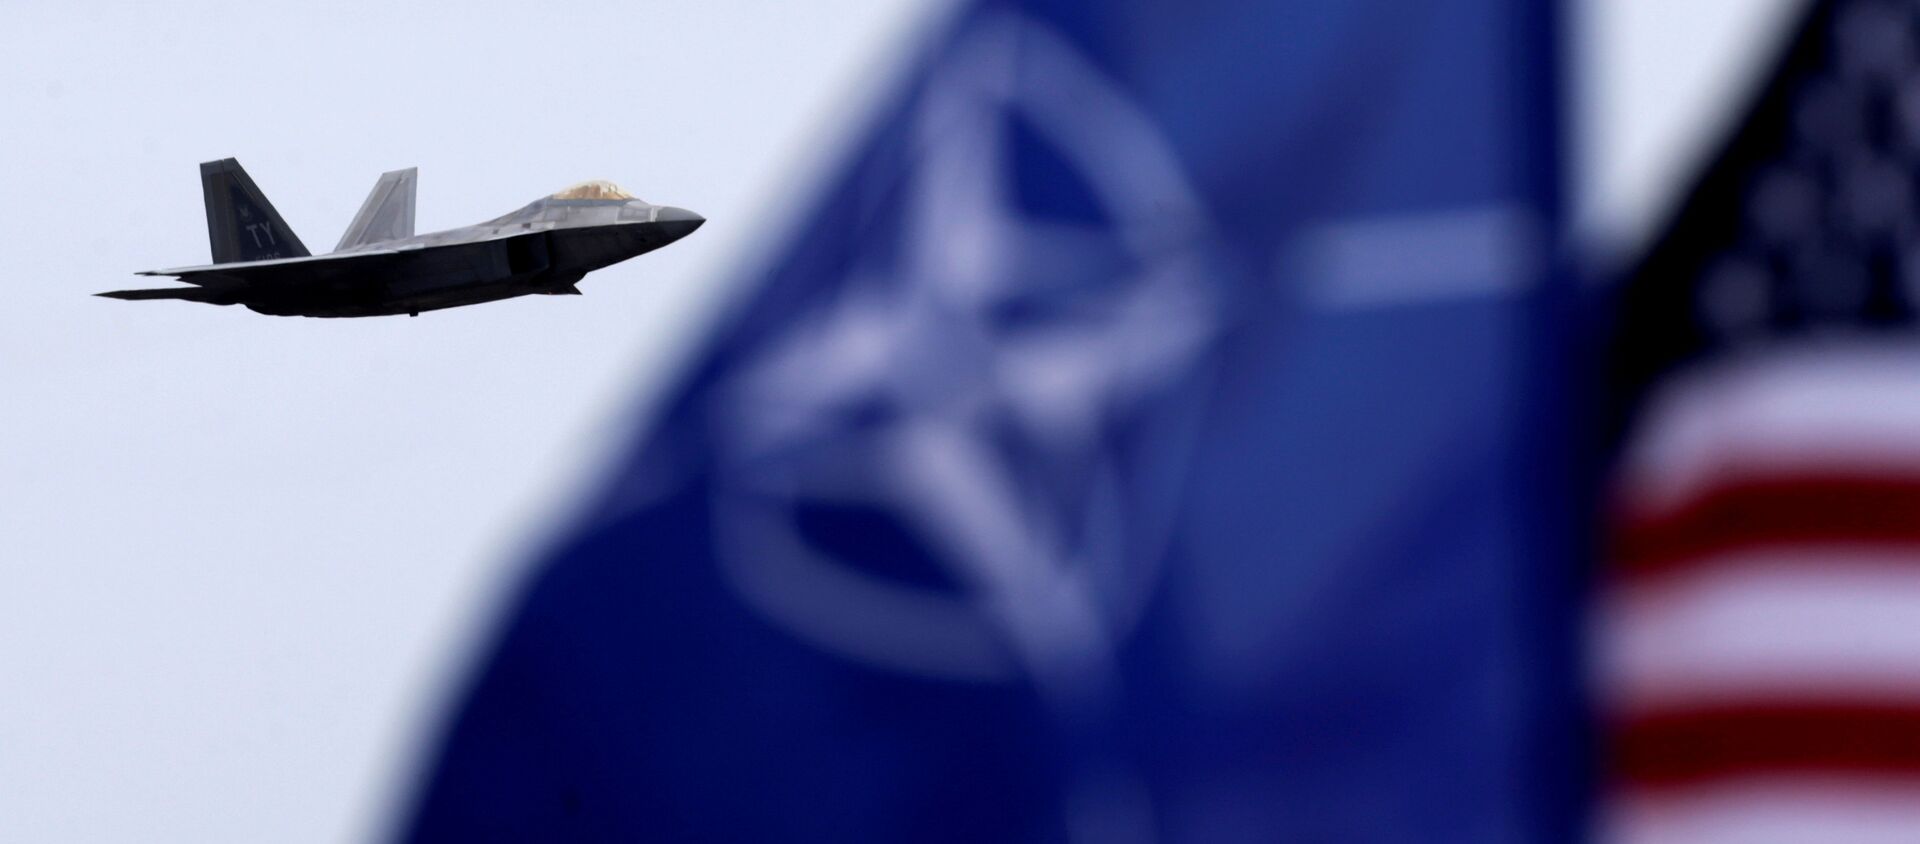 NATO and US flags flutter as U.S. Air Force F-22 Raptor fighter flies over the military air base in Siauliai, Lithuania, April 27, 2016. - Sputnik International, 1920, 07.06.2021